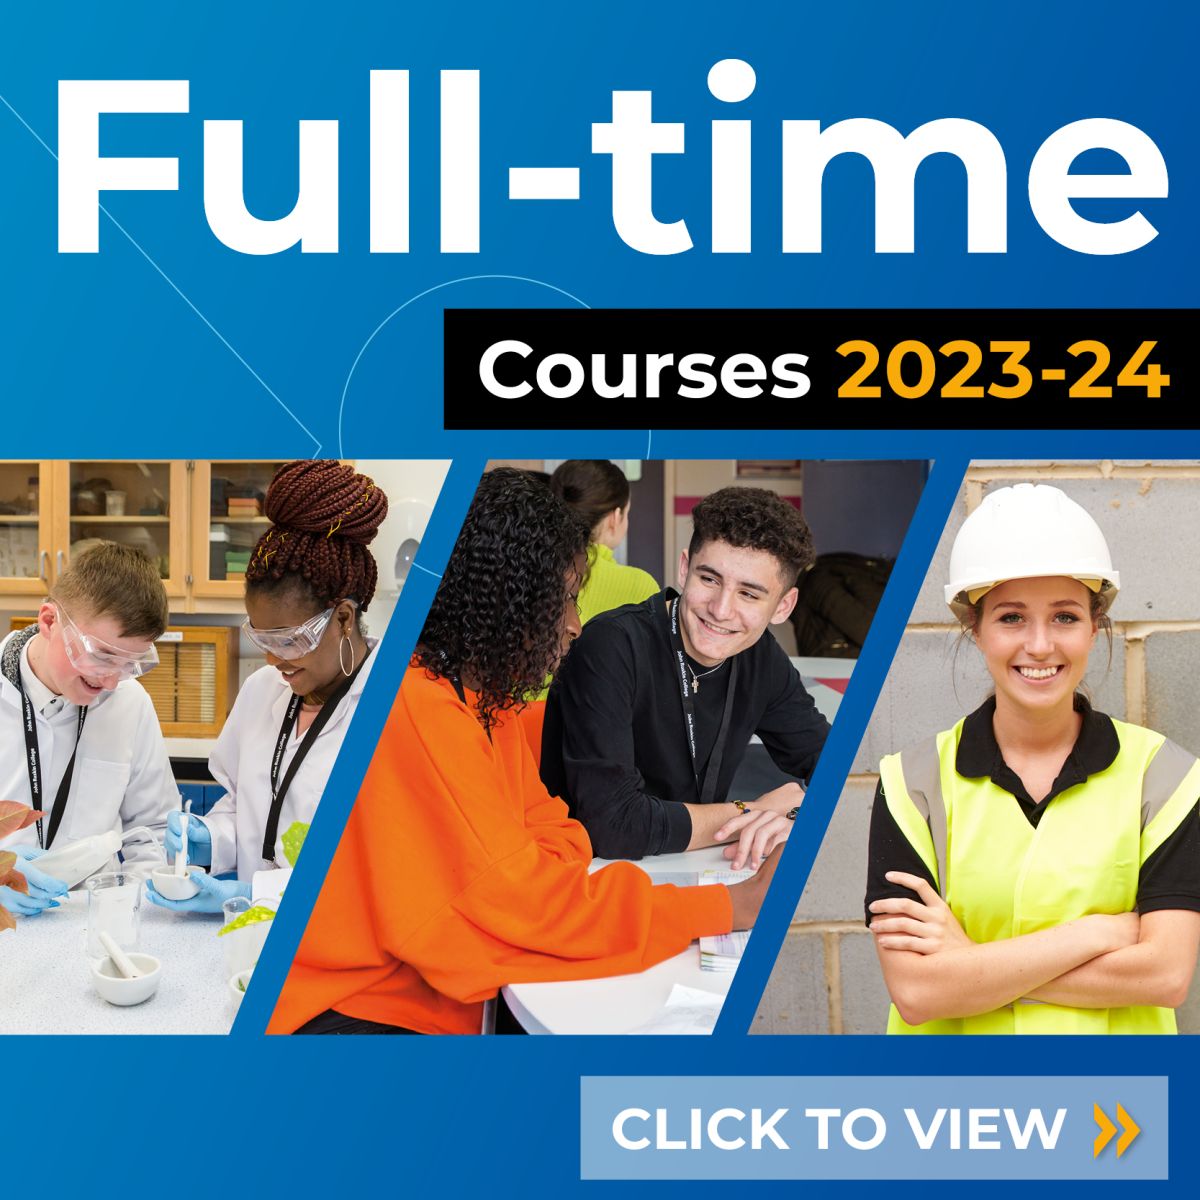 Clcik to view Full tIme courses